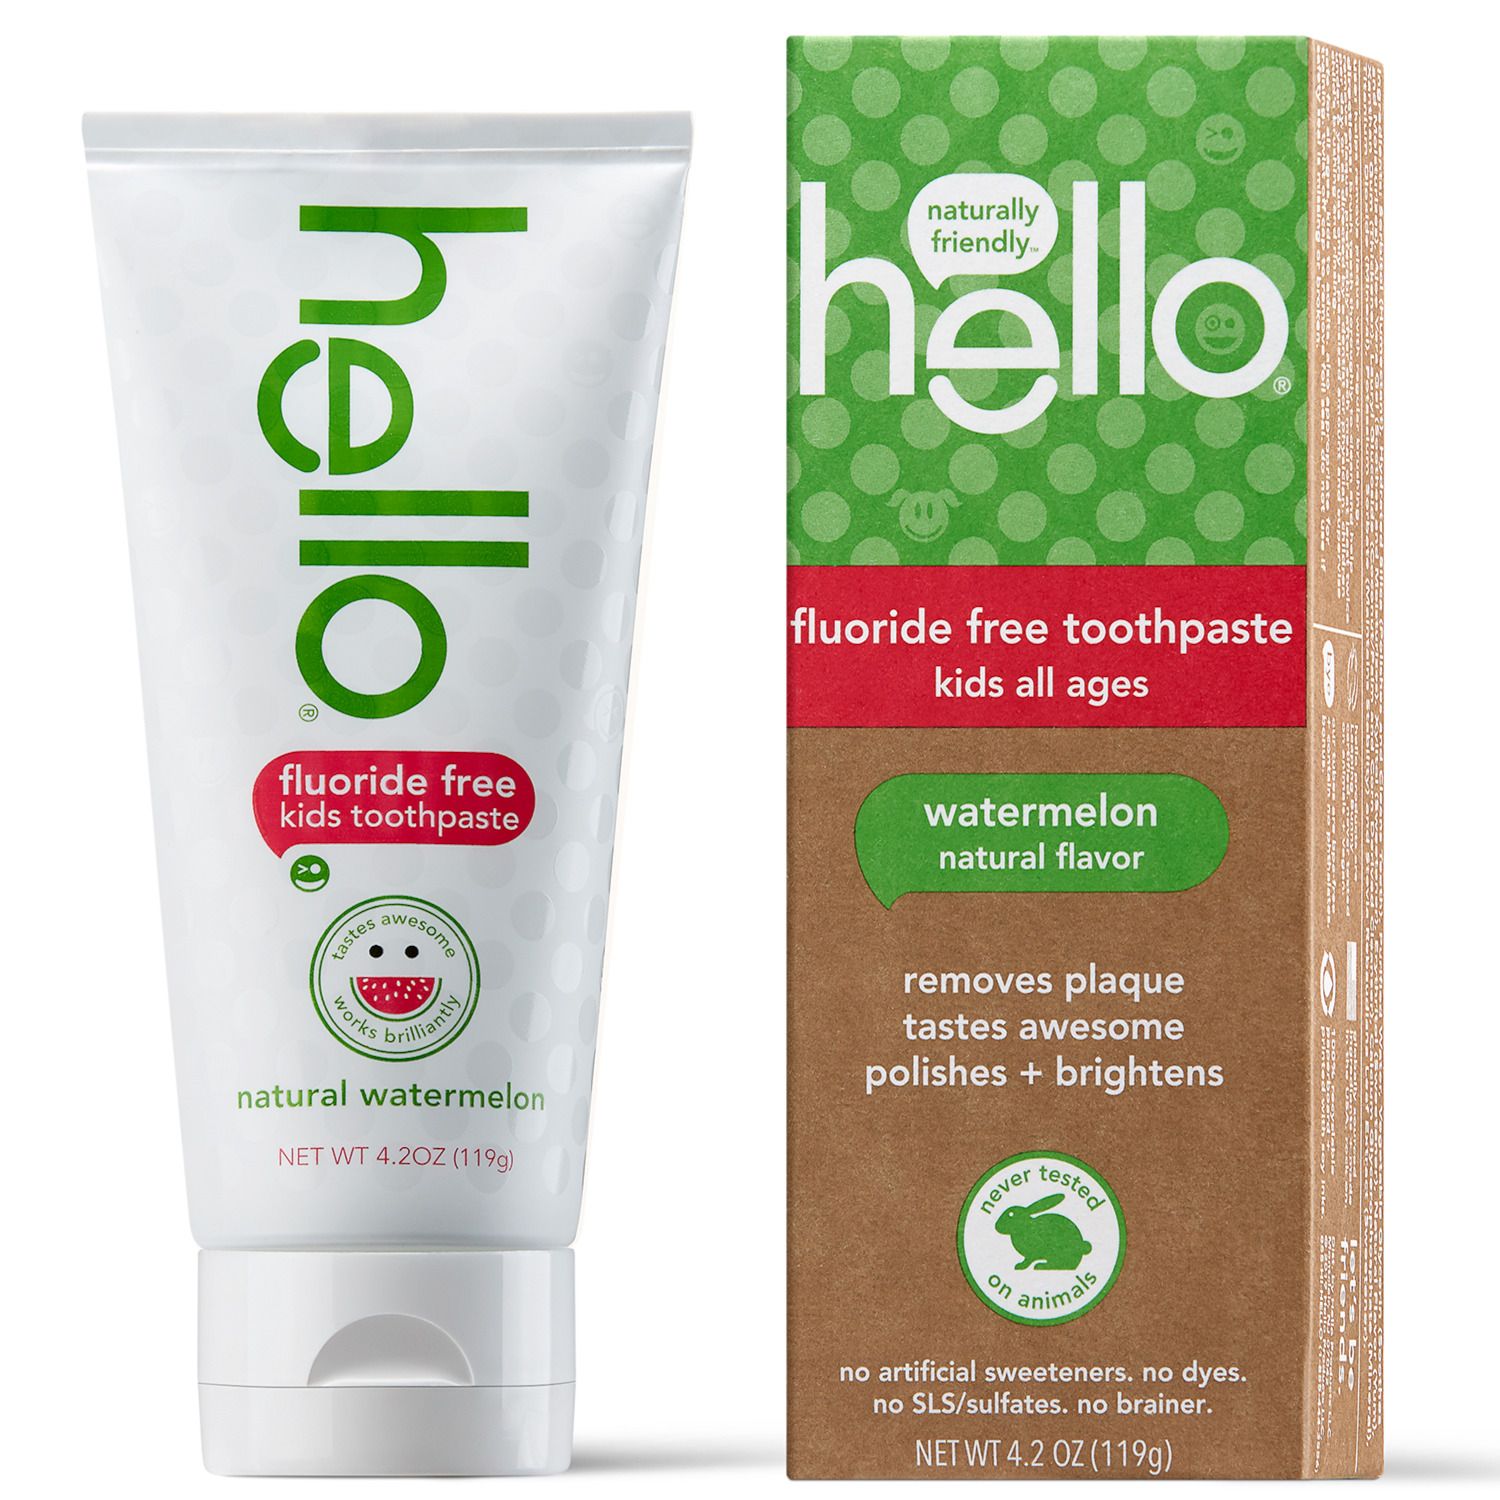 Image for hello Kids Fluoride Free Natural Watermelon Toothpaste at Kohl's.